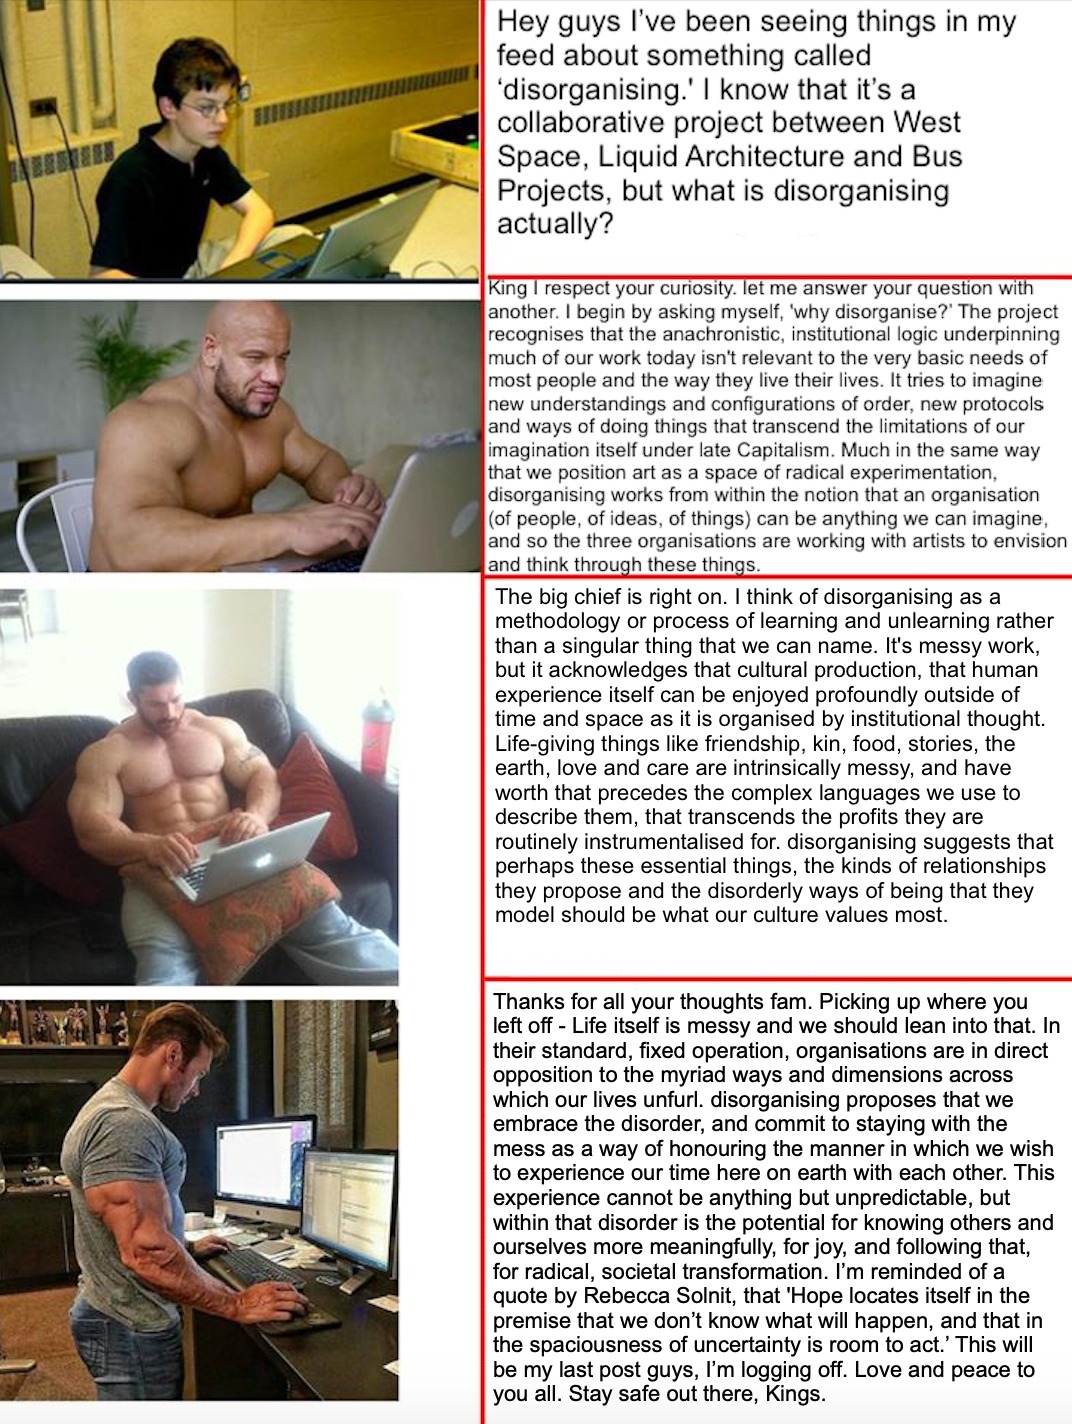 a meme for disorganising featuring a young boy sitting at a computer and three muscley men sitting at their laptops.